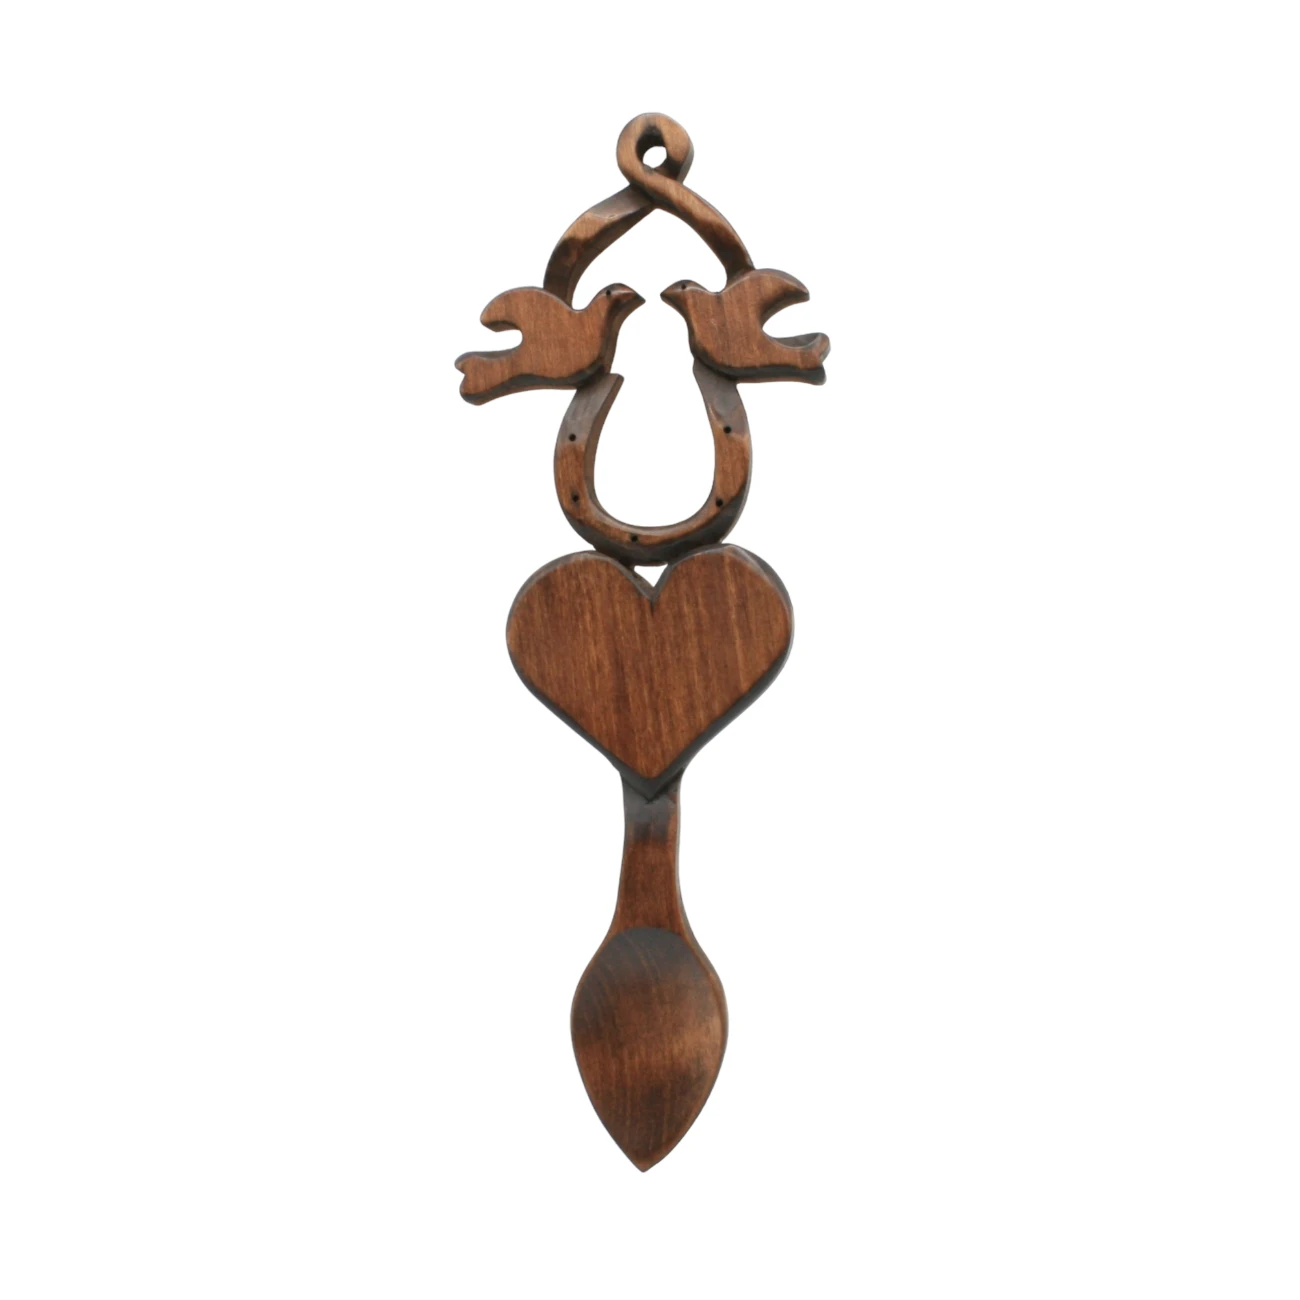 An image of a lovespoon titled Birds, Heart & Horseshoe